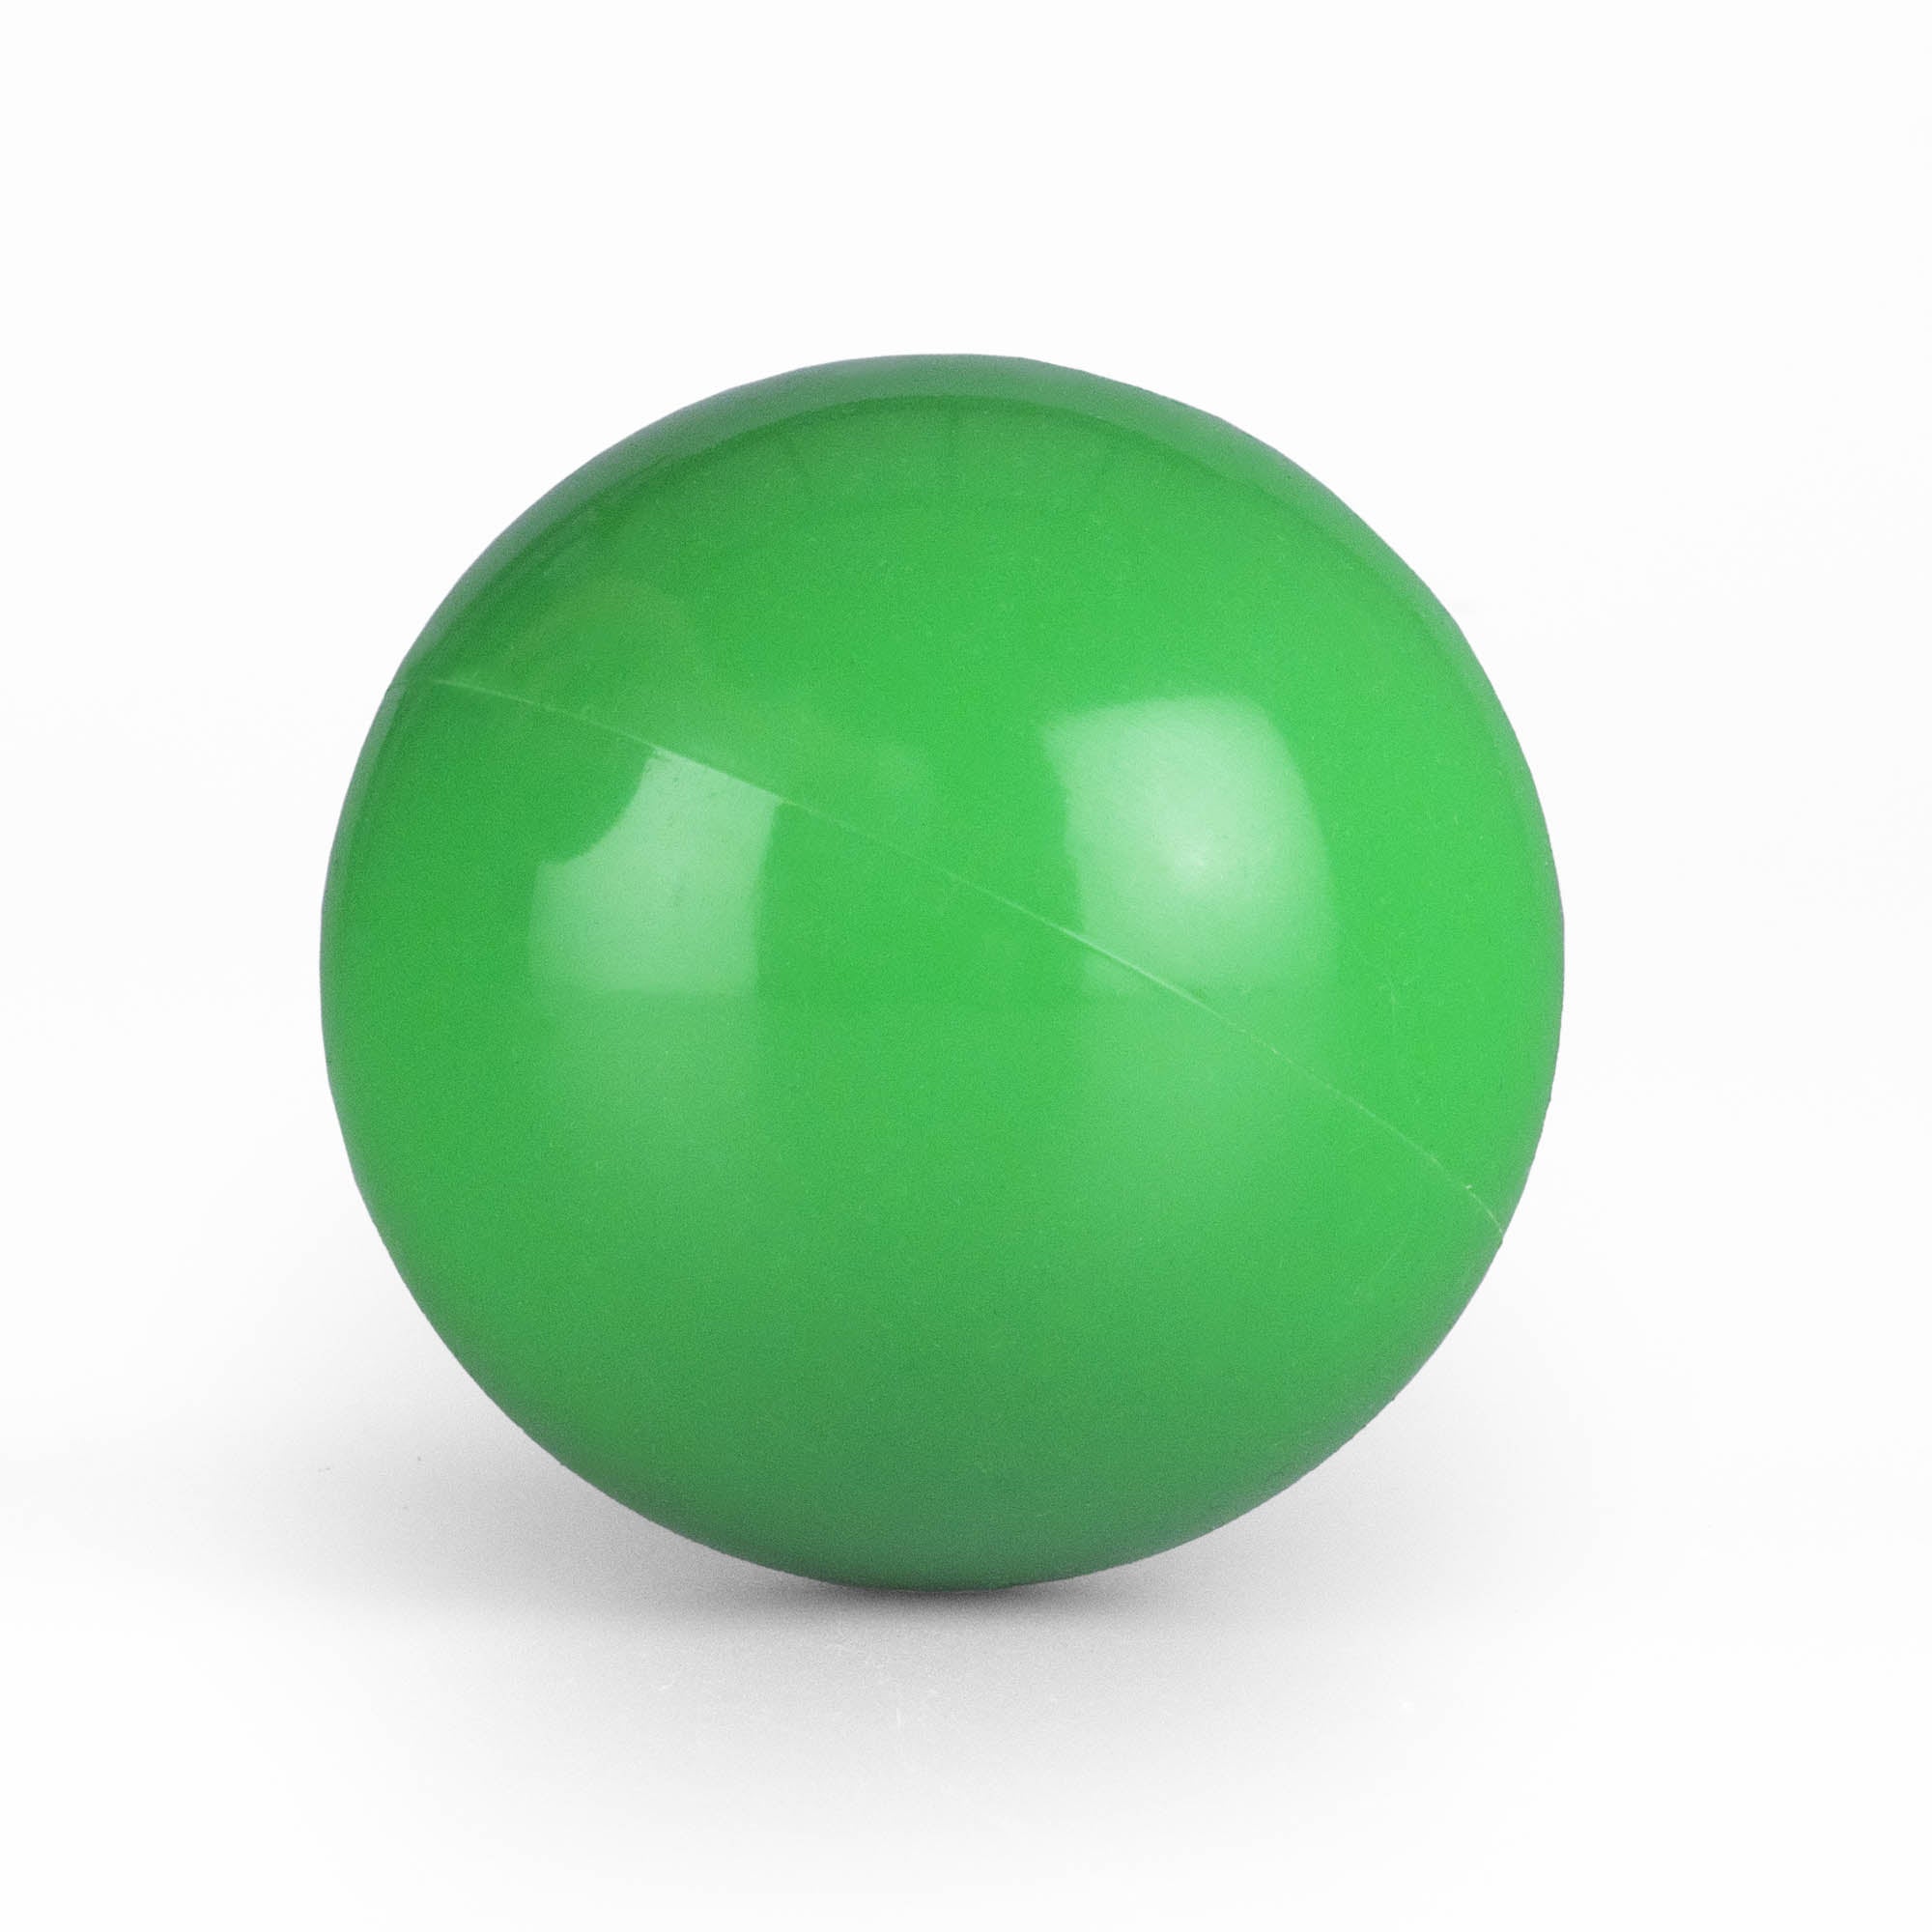 Mr babache stage ball 72mm in green